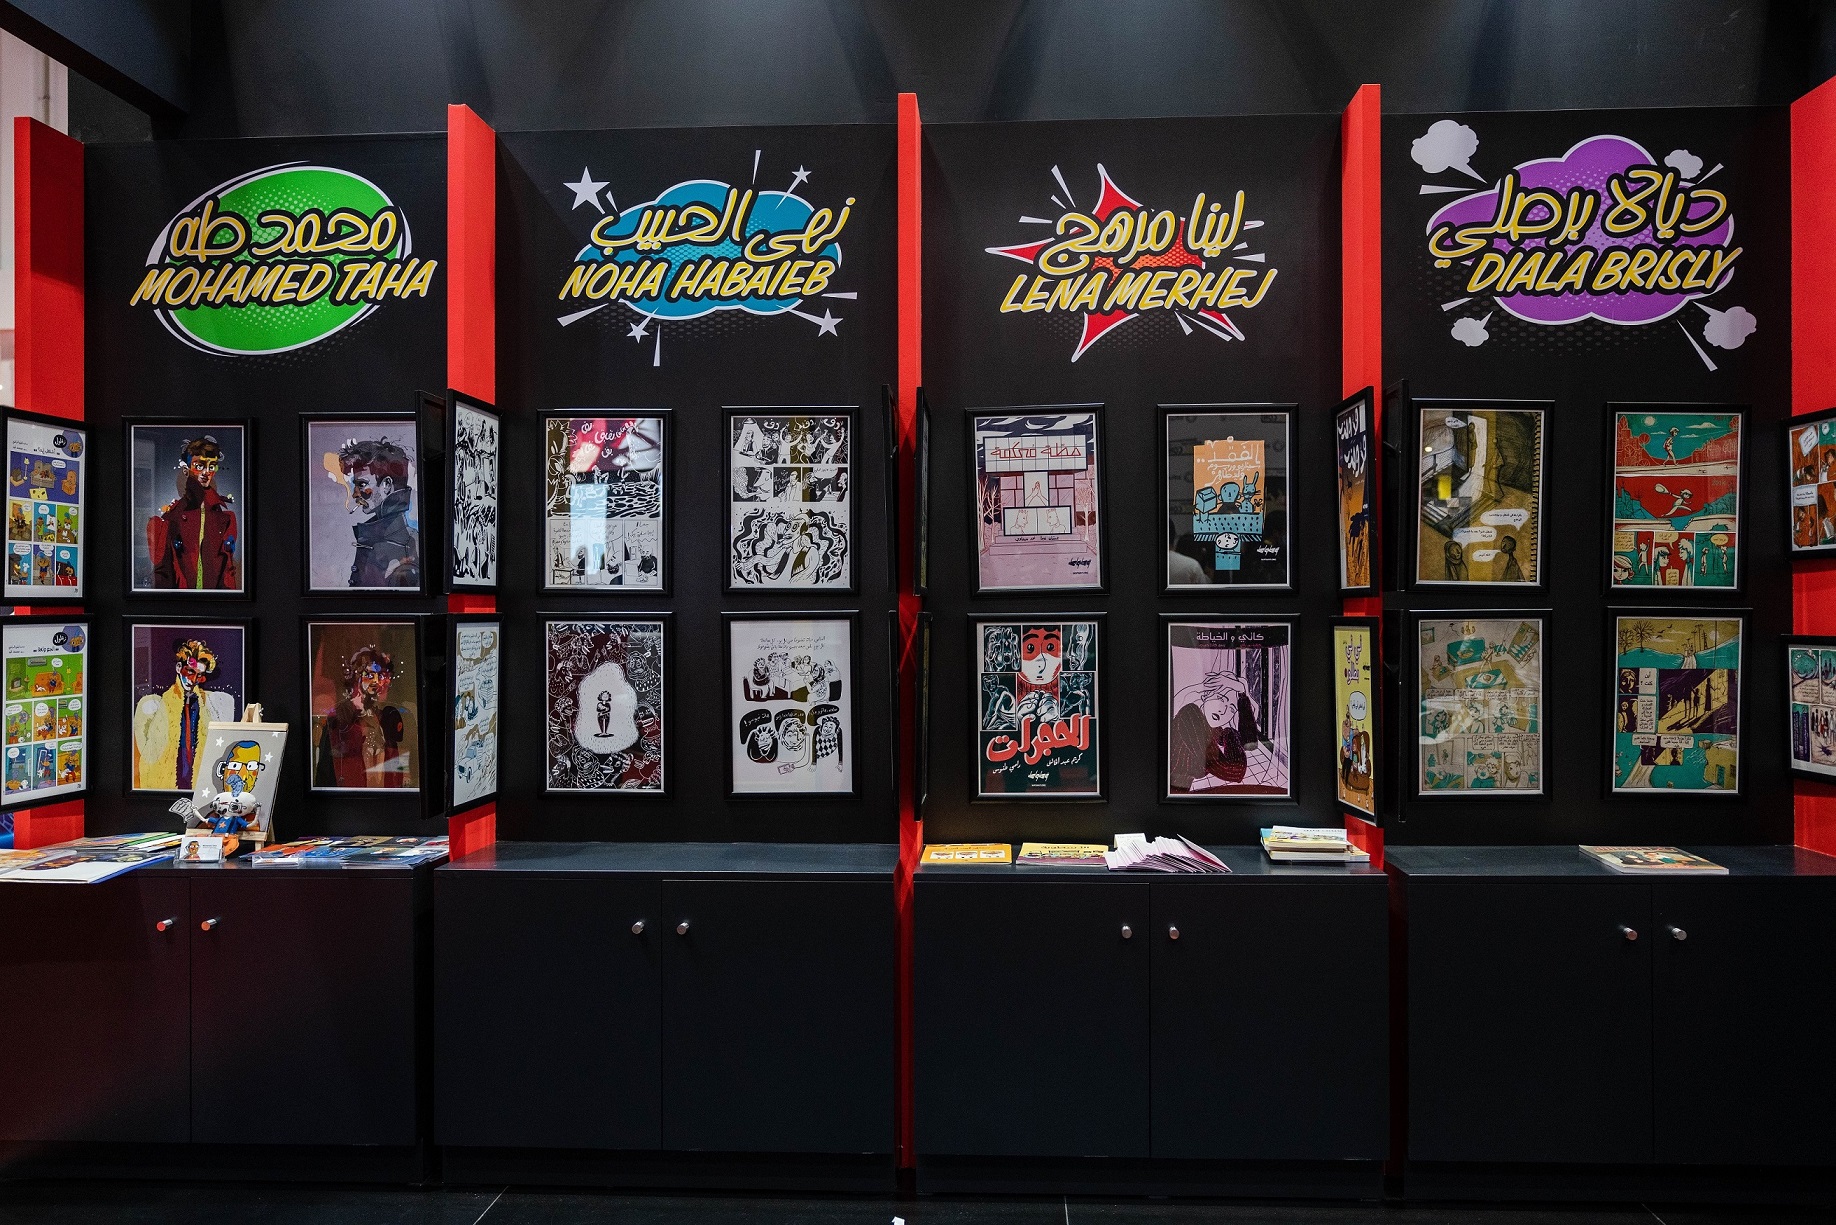 Etisalat Award Showcases Skillsets Of Arab Comic Book Artists At Middle East Film & Comic Con